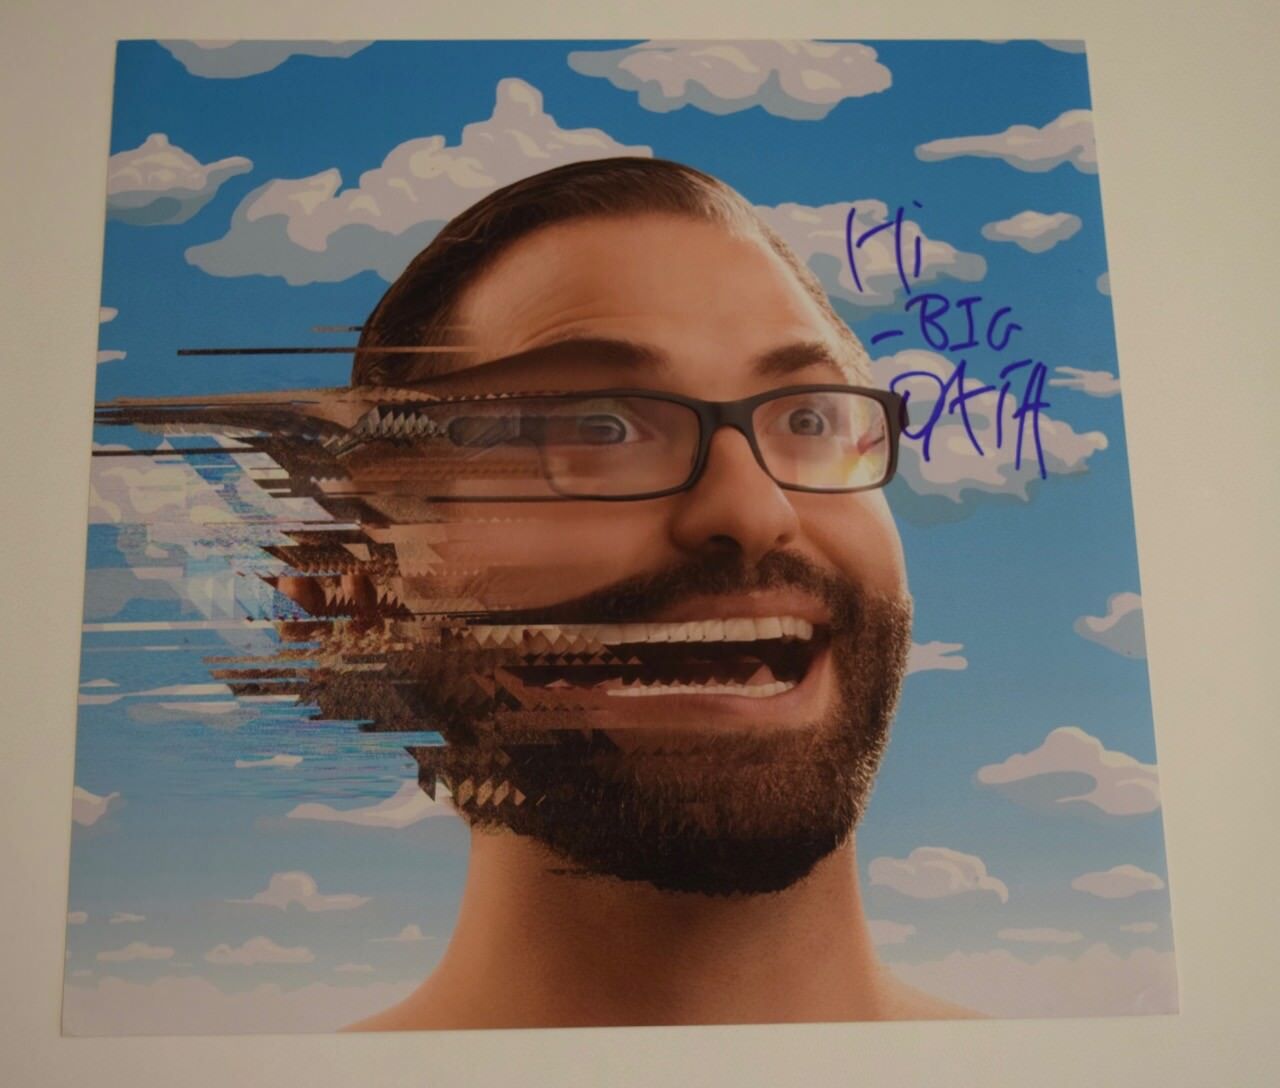 Big Data Alan Wilkis Signed Autographed 12x12 Album Flat Photo Poster painting COA VD